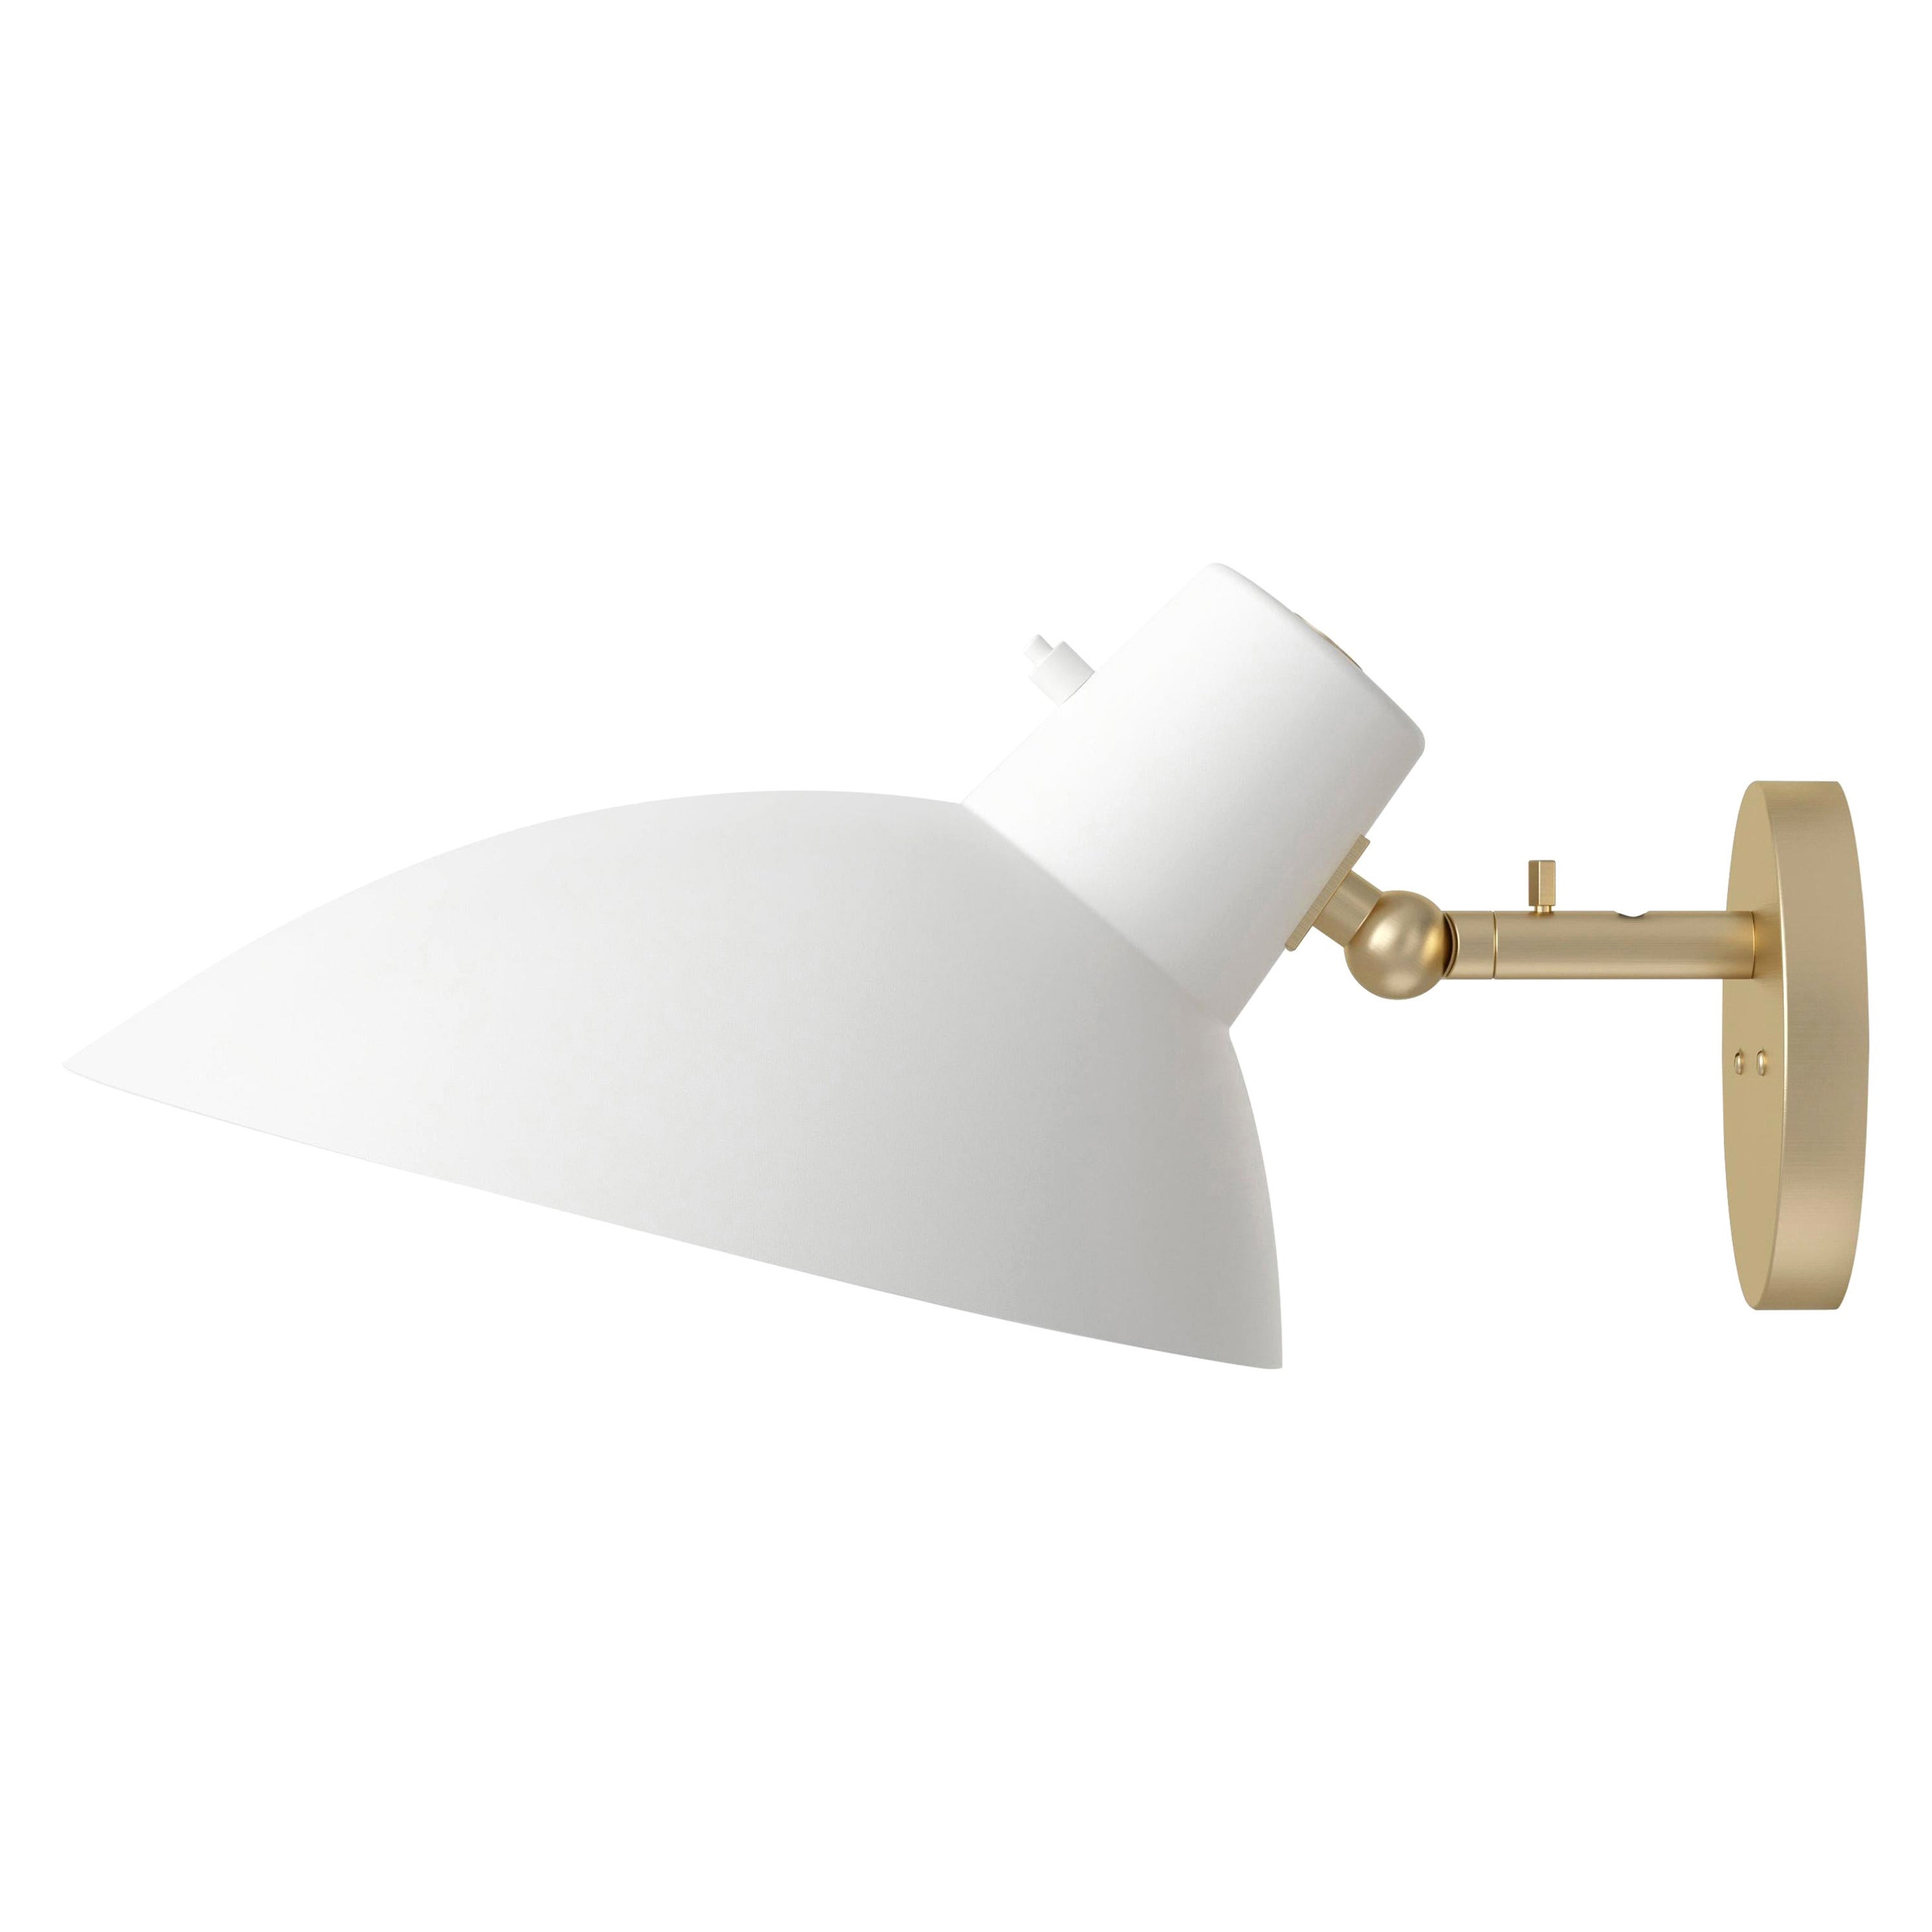 VV Cinquanta White and Brass Wall Design by Vittoriano Viganò for Astep For Sale